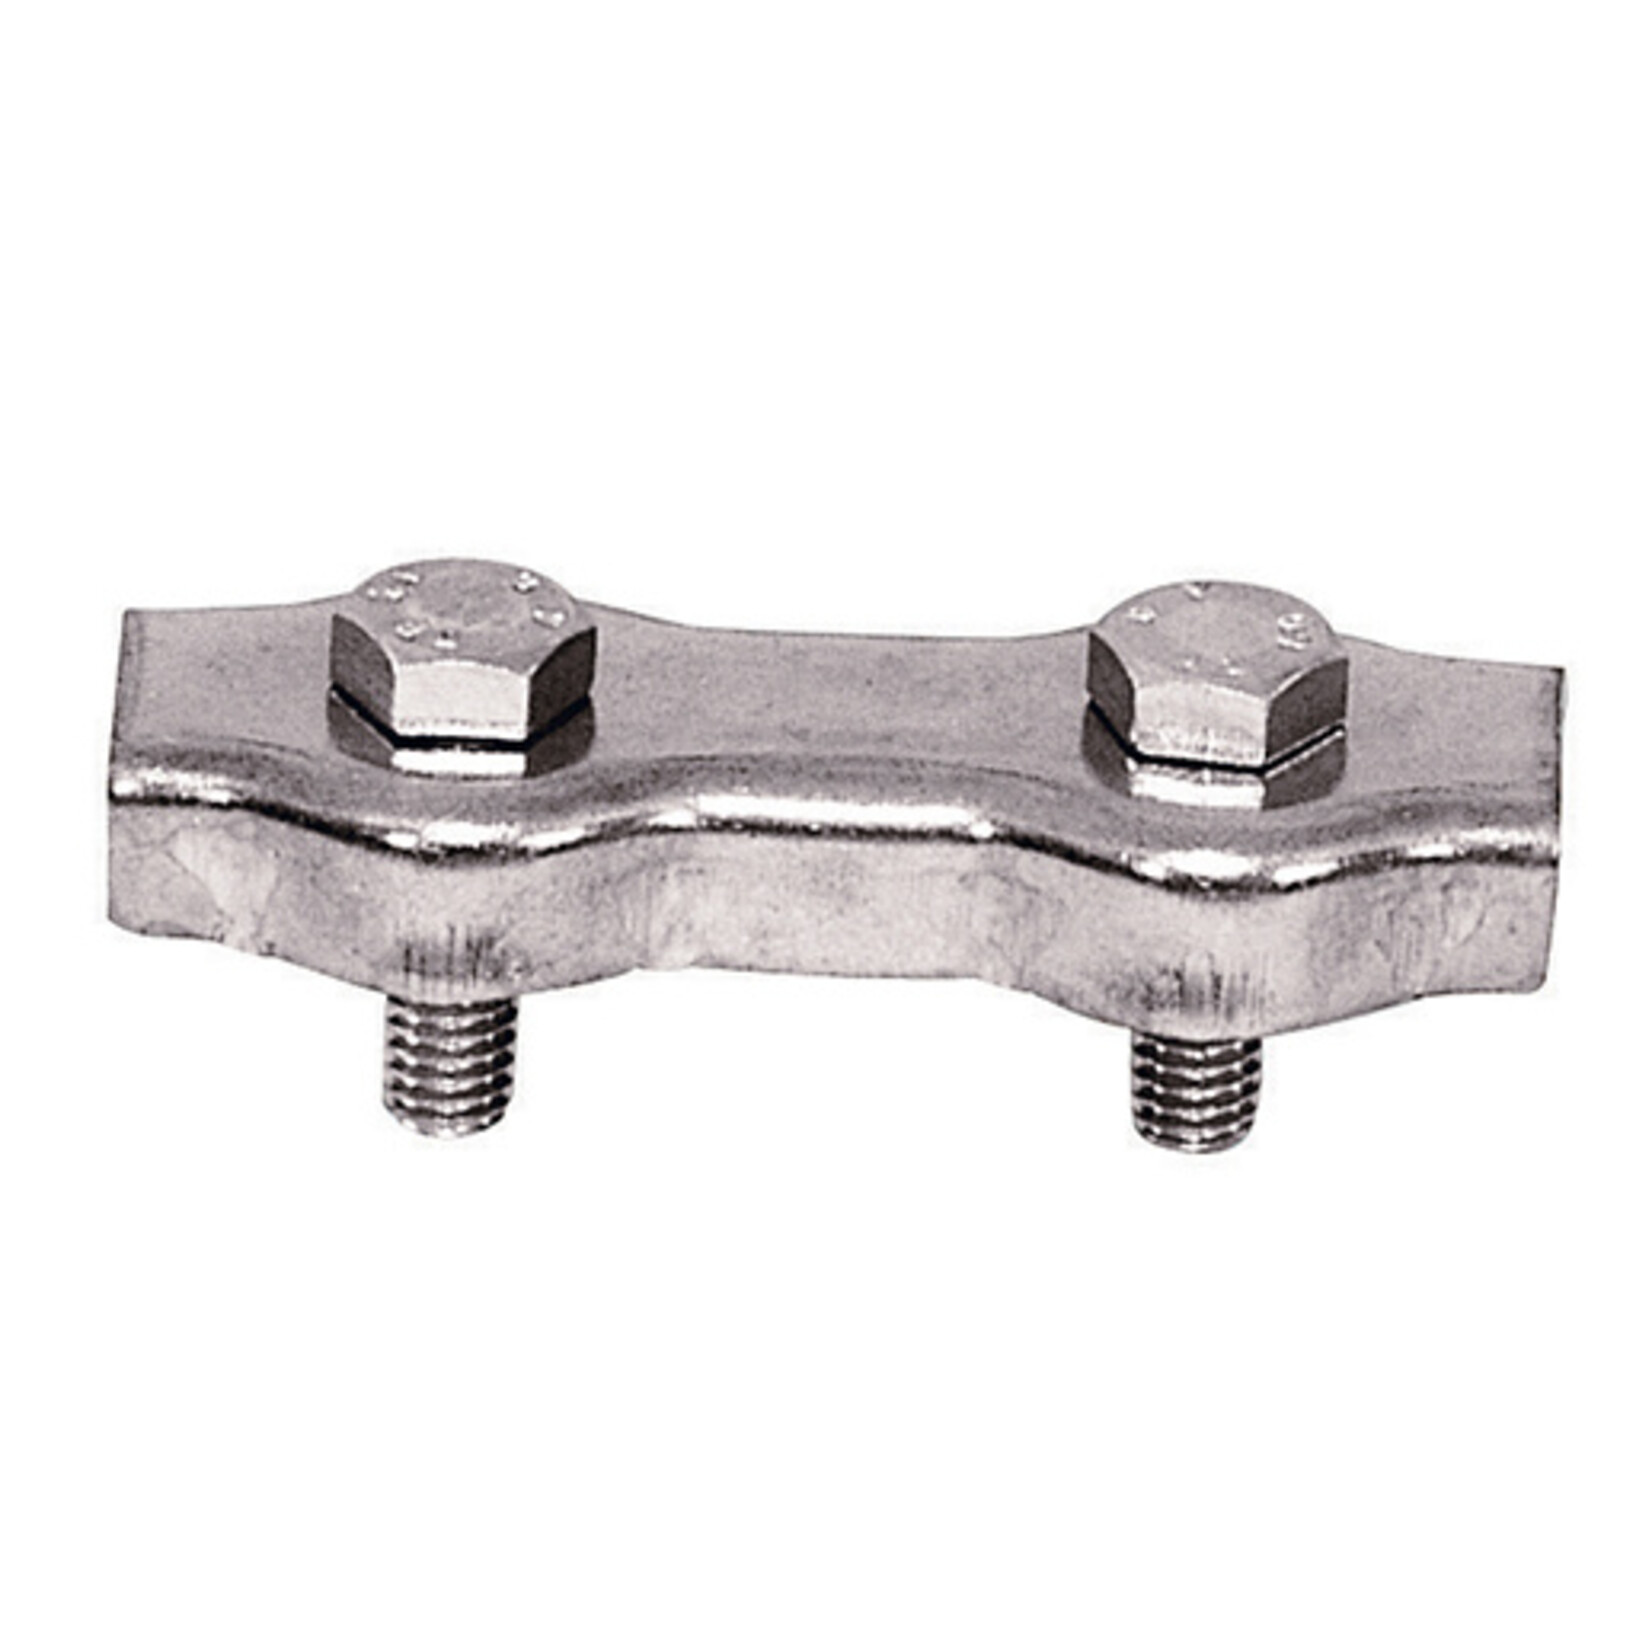 Plastimo Cable clamp st/steel dia 6mm